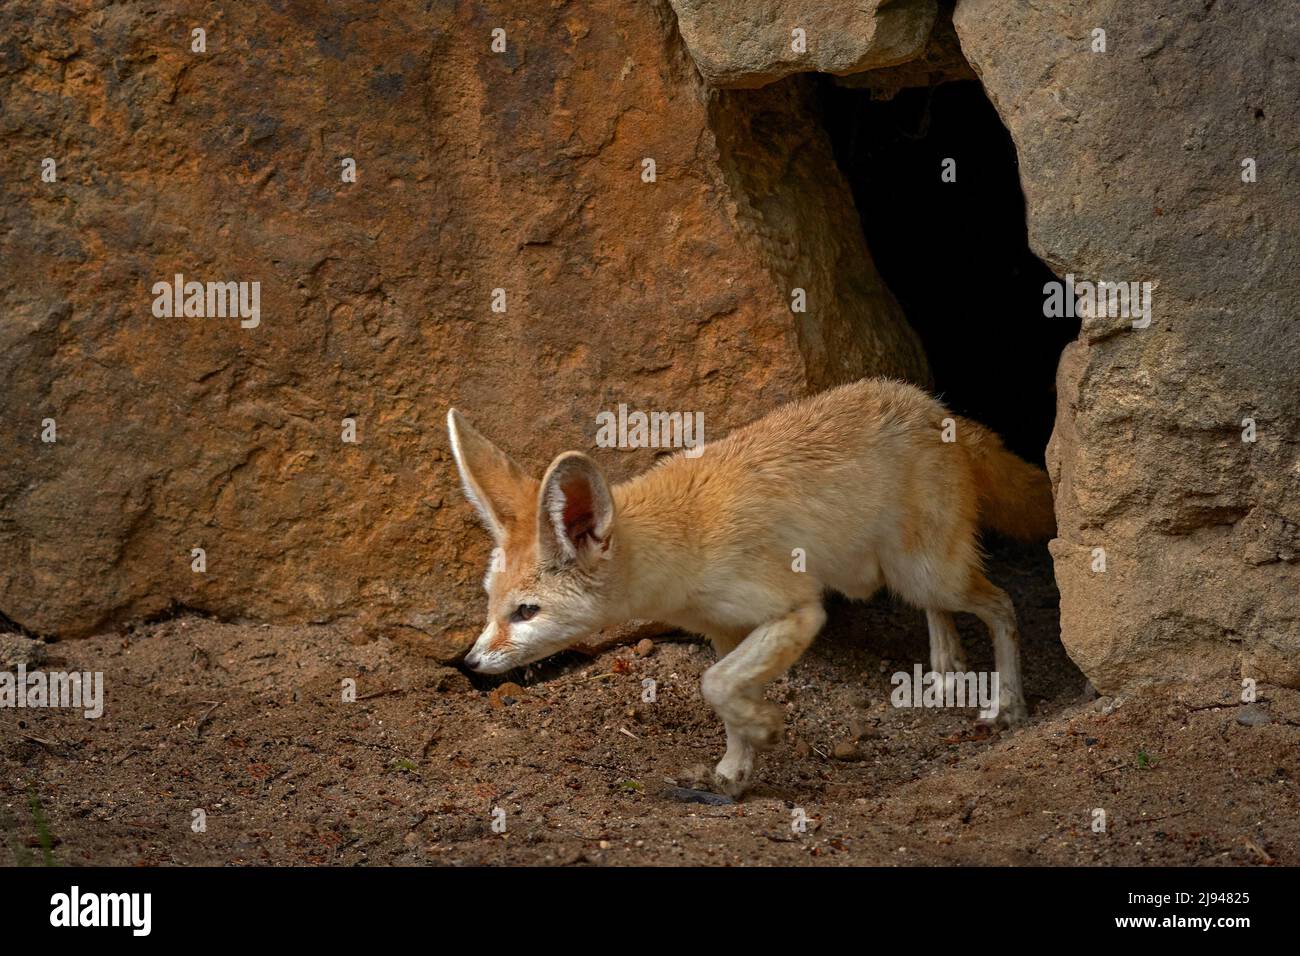 Fennec fox, Vulpes zerda, small crepuscular fox native to the deserts of North Africa. Stock Photo